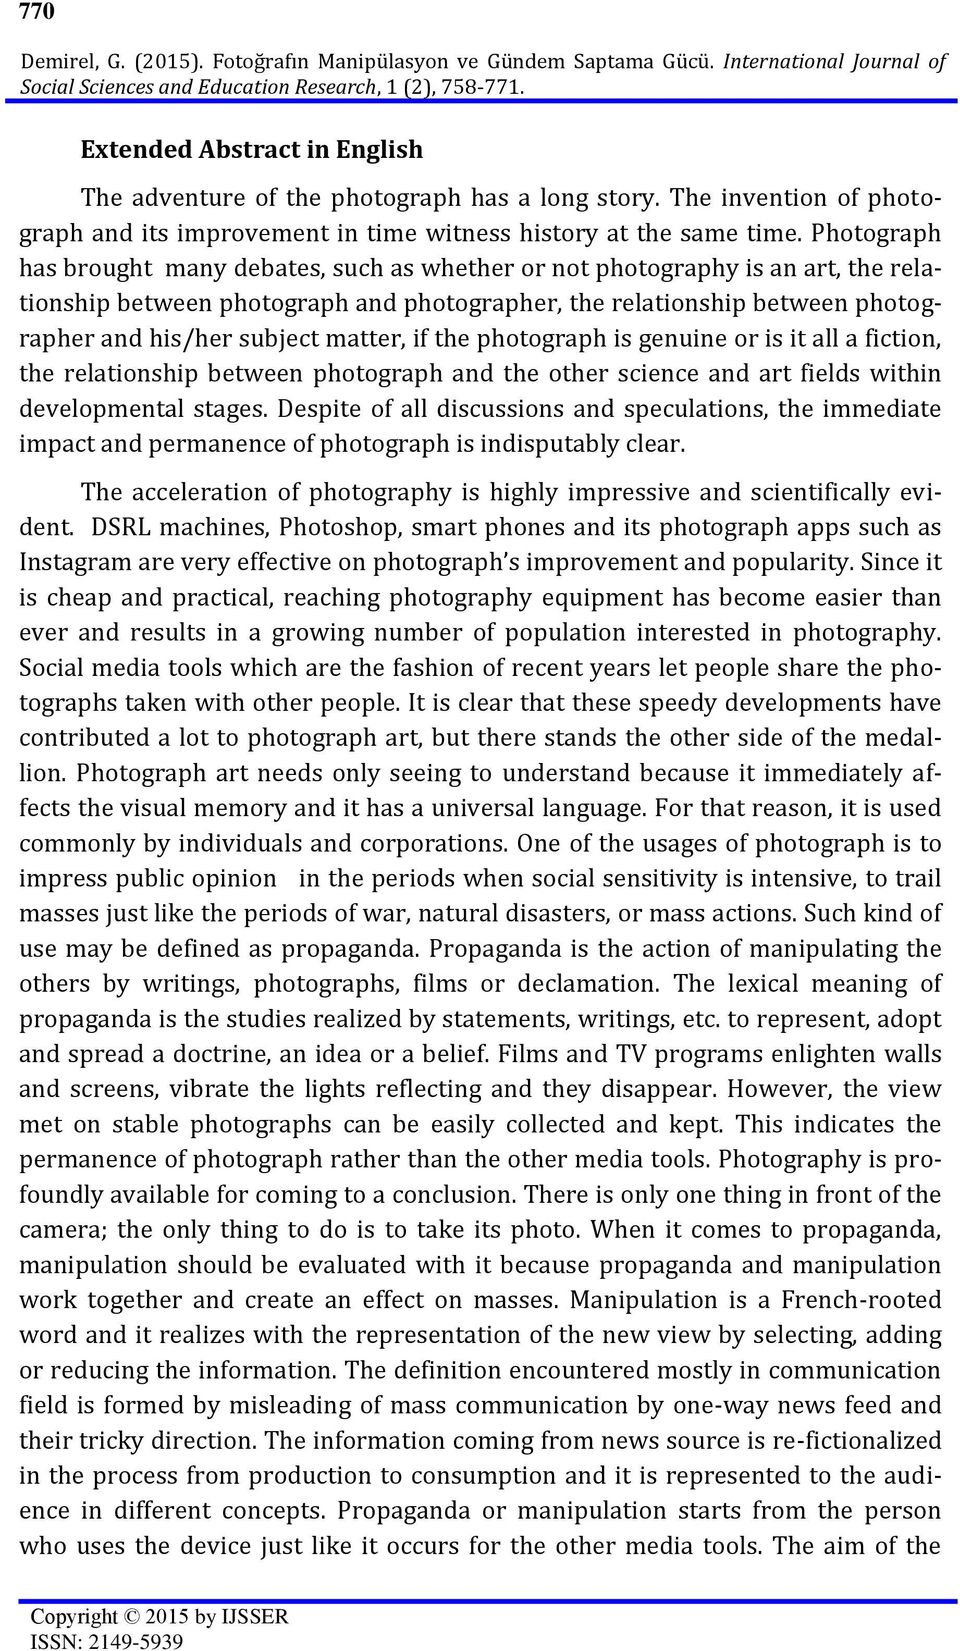 Photograph has brought many debates, such as whether or not photography is an art, the relationship between photograph and photographer, the relationship between photographer and his/her subject